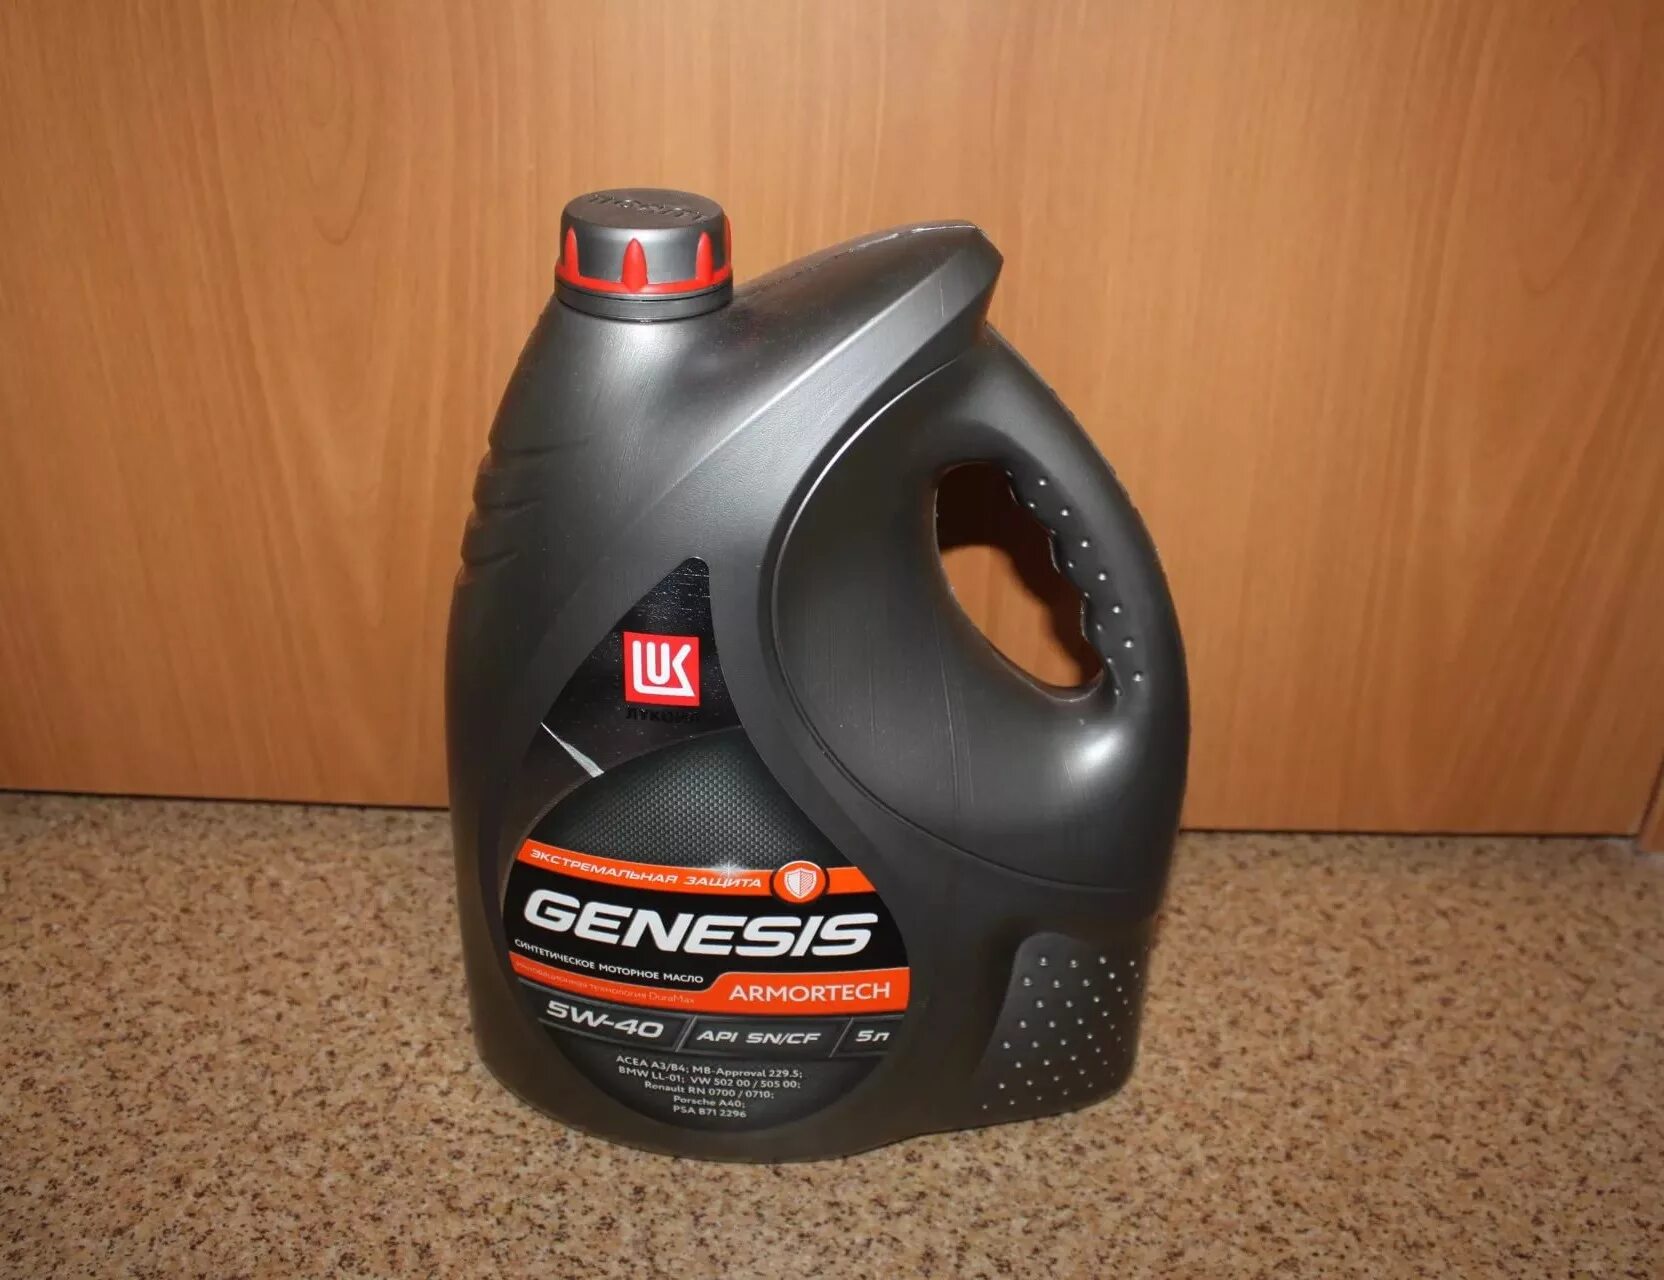 Масло лукойл арматек 5. Genesis Armortech 5w-40. 5w-40 Genesis Armortech 4л. Масло Лукойл 5w40 Genesis Armortech. Лукойл Genesis Armortech 5w-40.